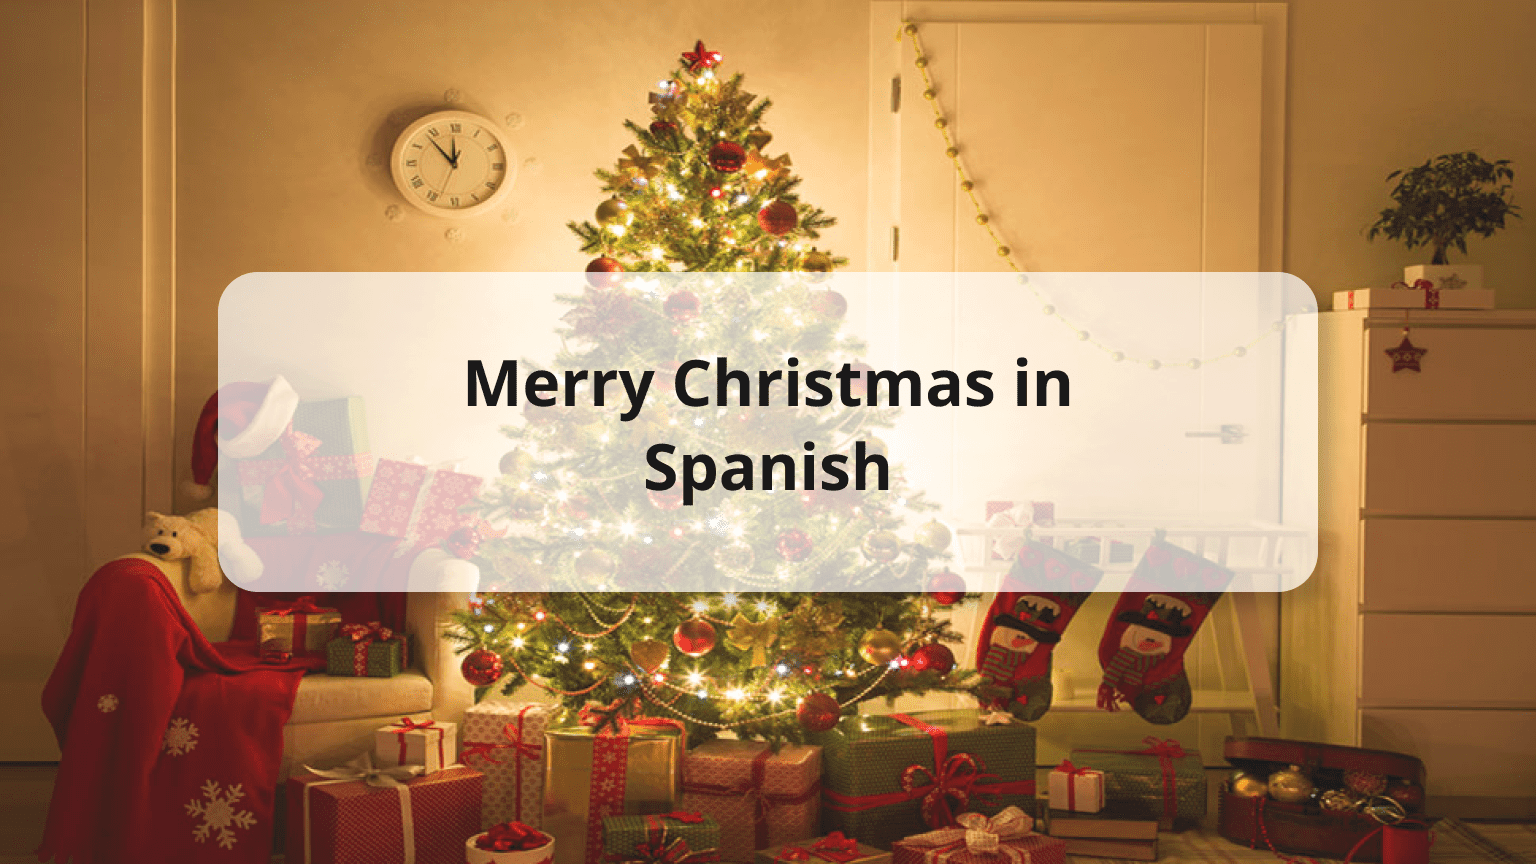 Merry Christmas in Spanish: Your Holiday Guide